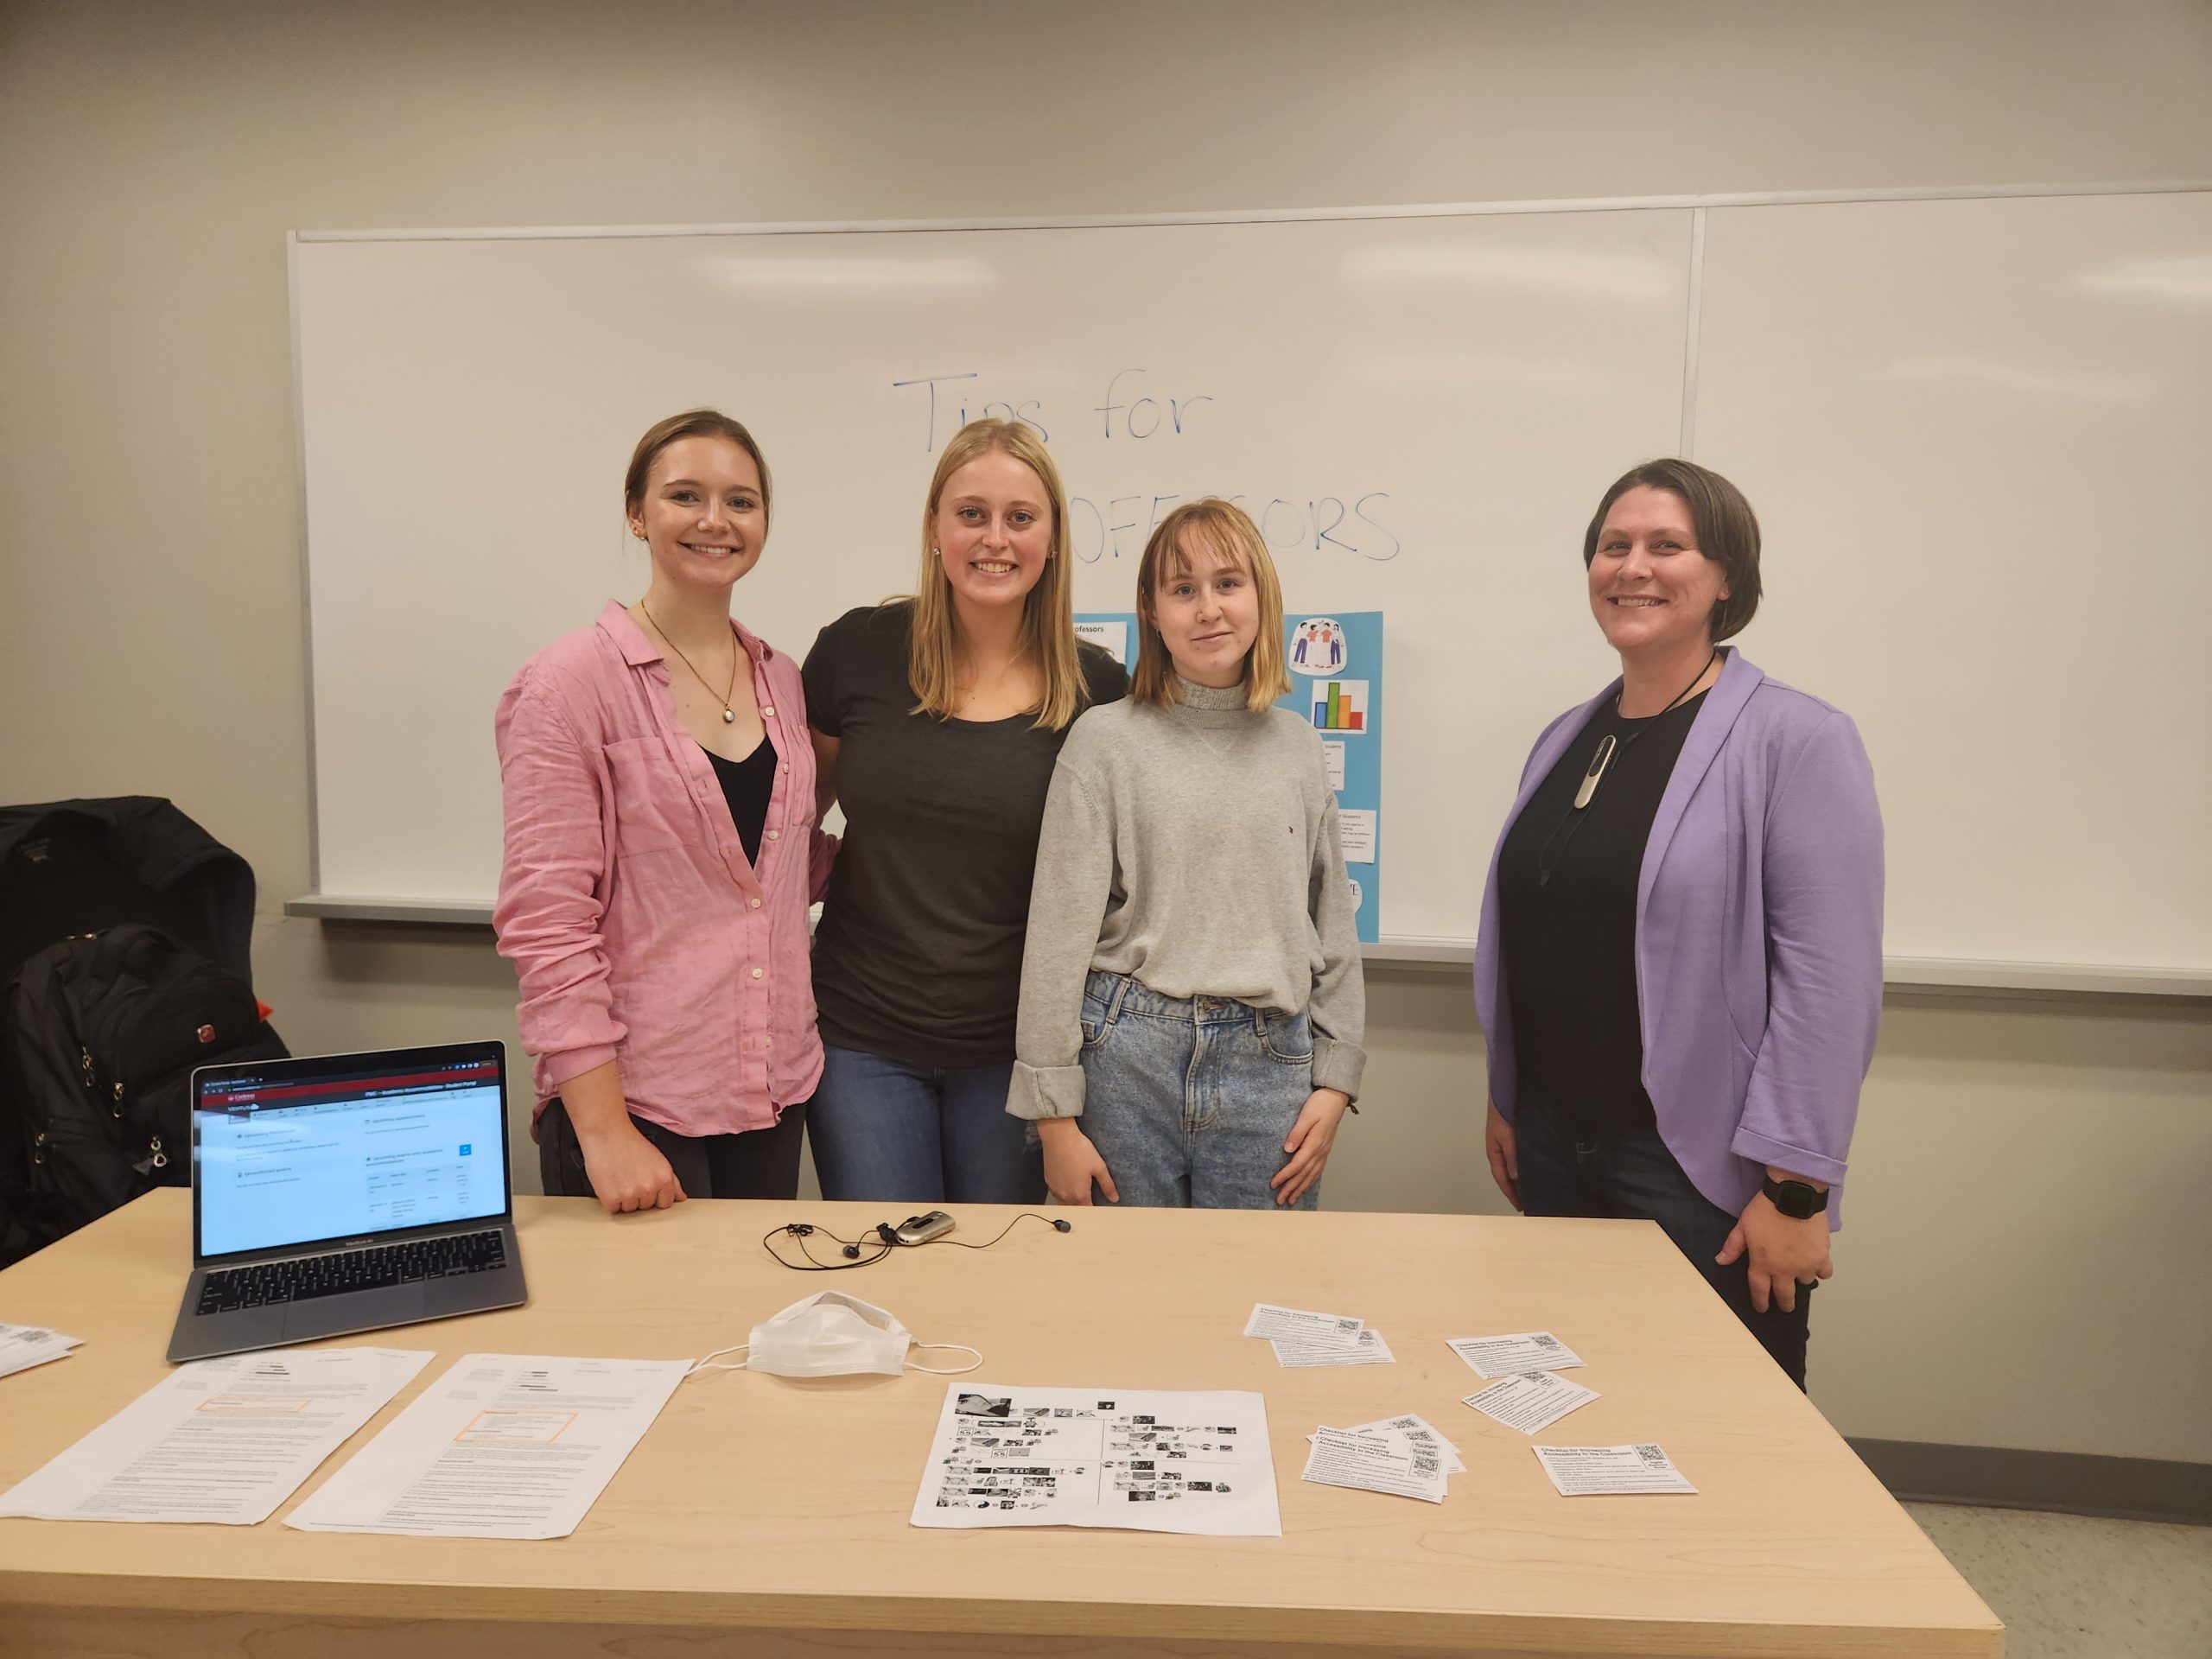 Professor Tamara Sorenson Duncan (right) with three students from the class.